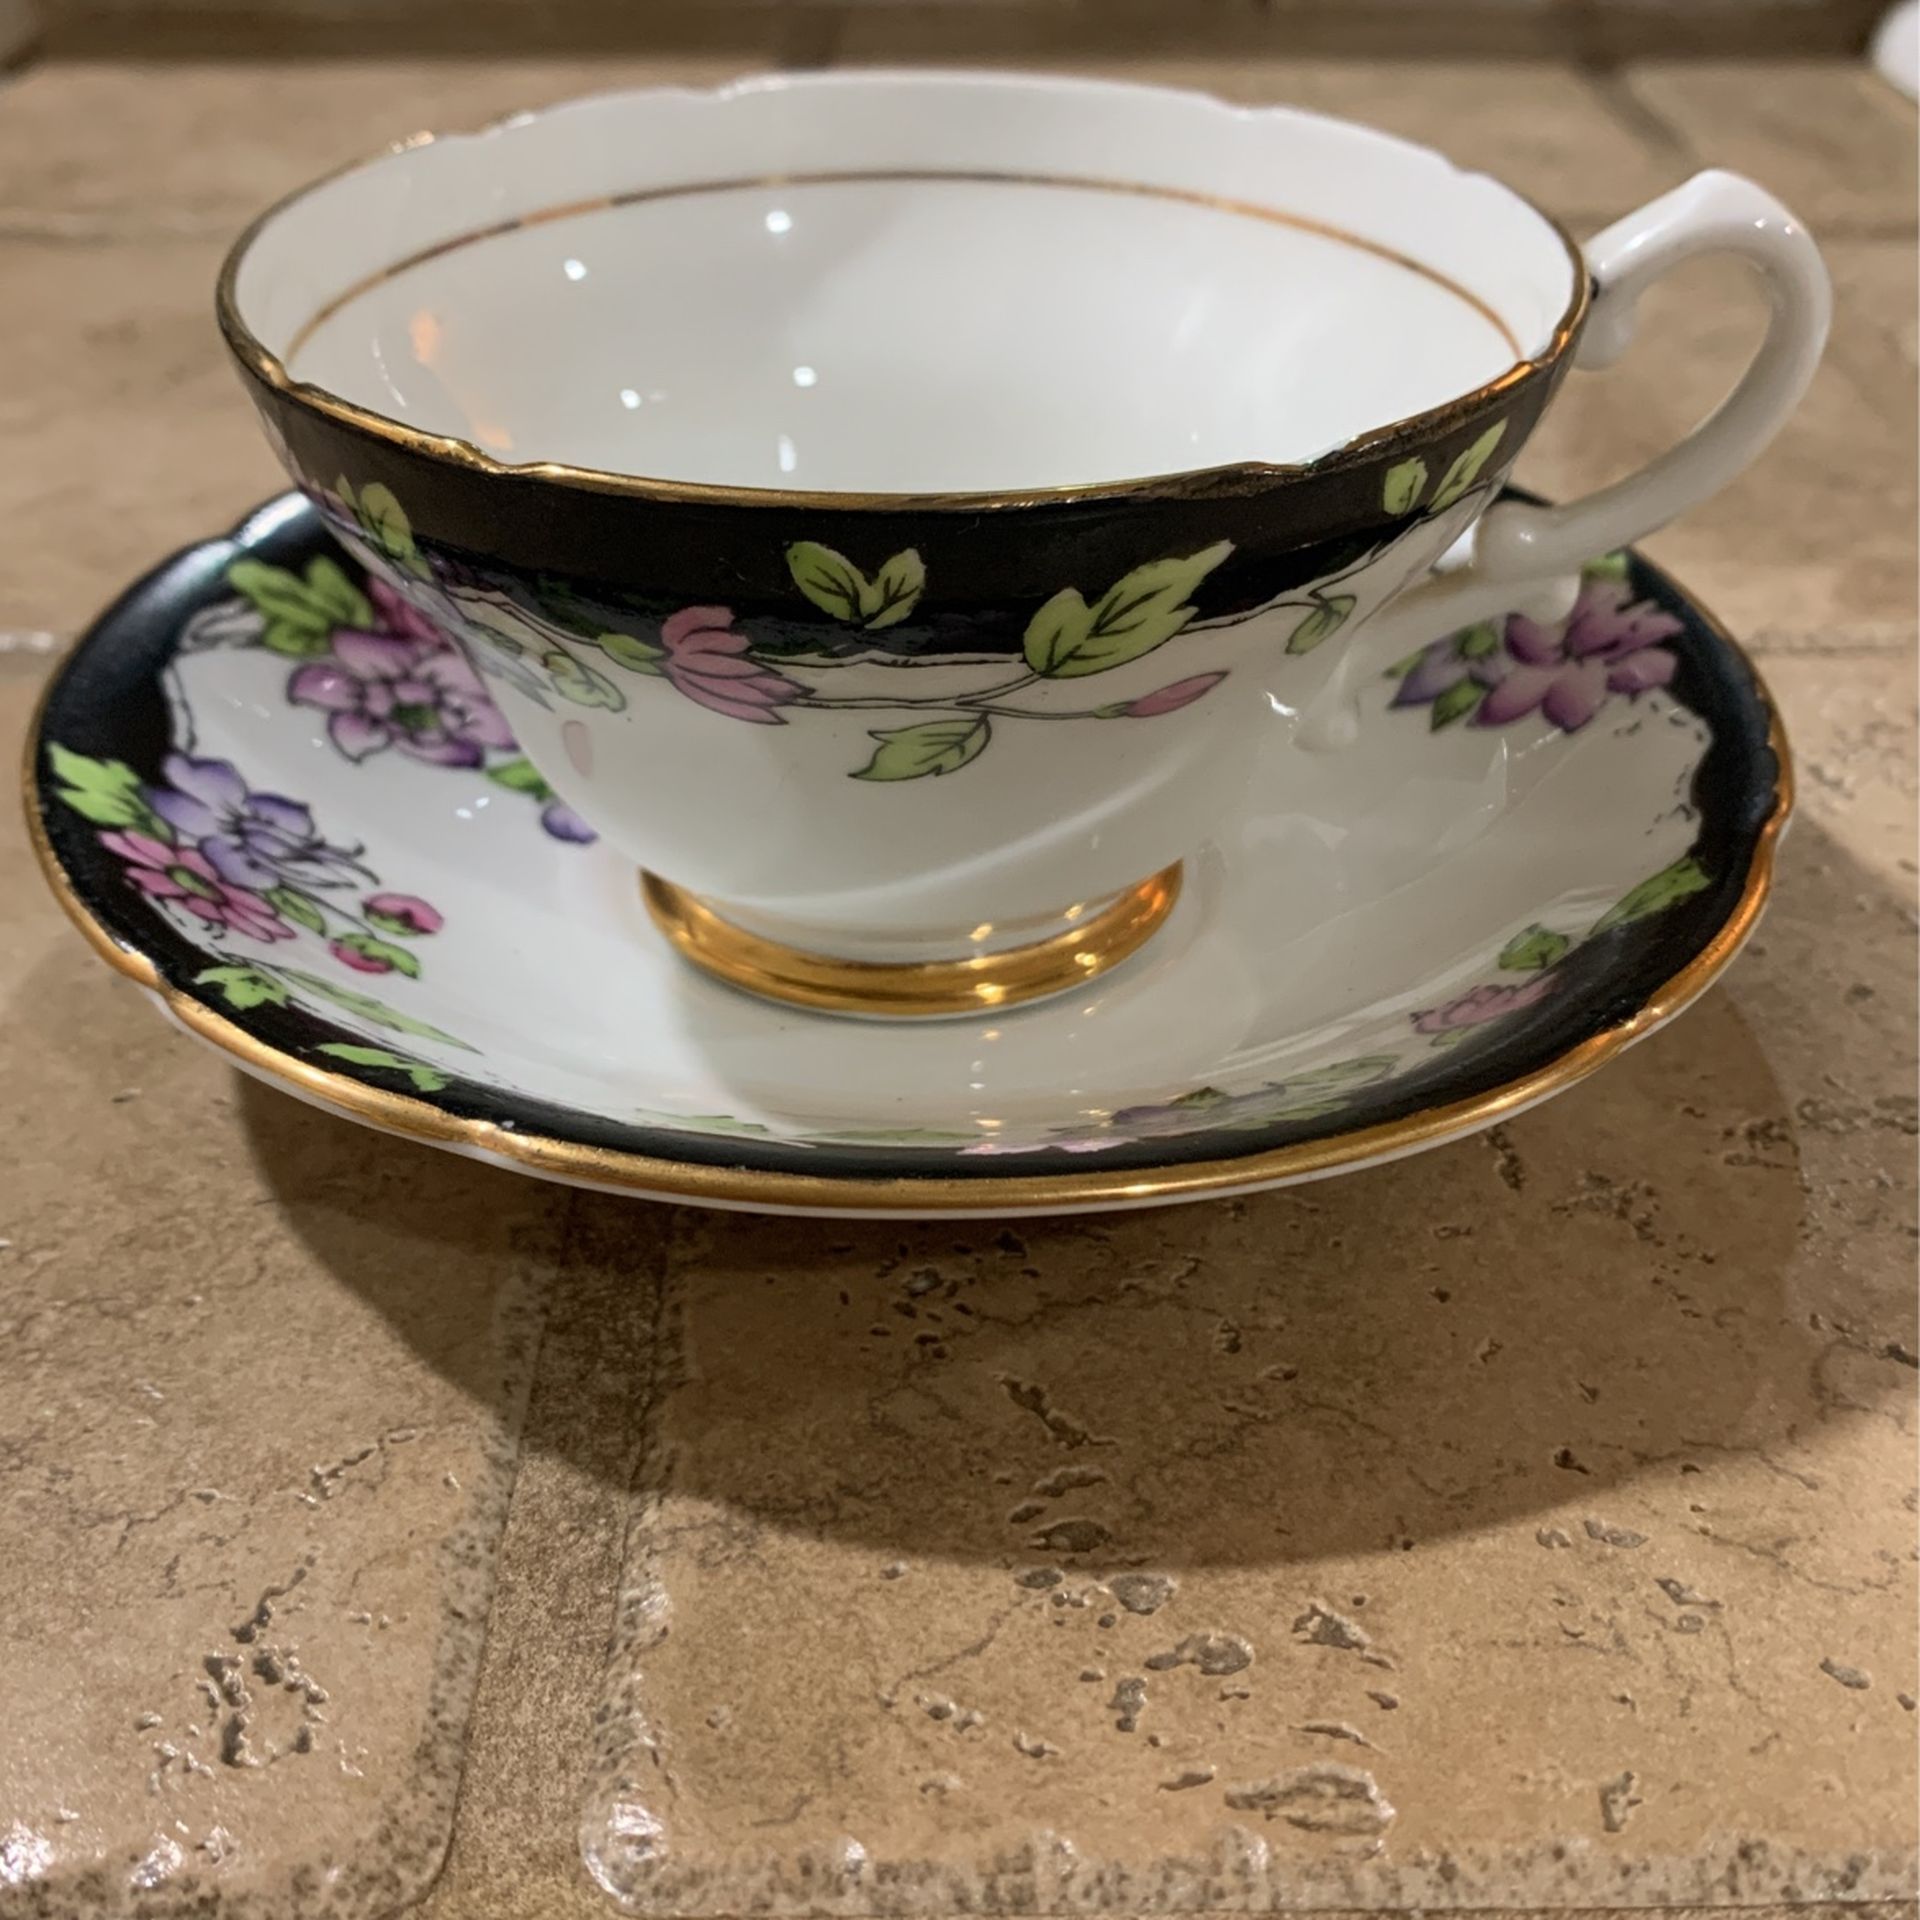 Vintage Stanley Black with Floral Bone China Teacup and Saucer